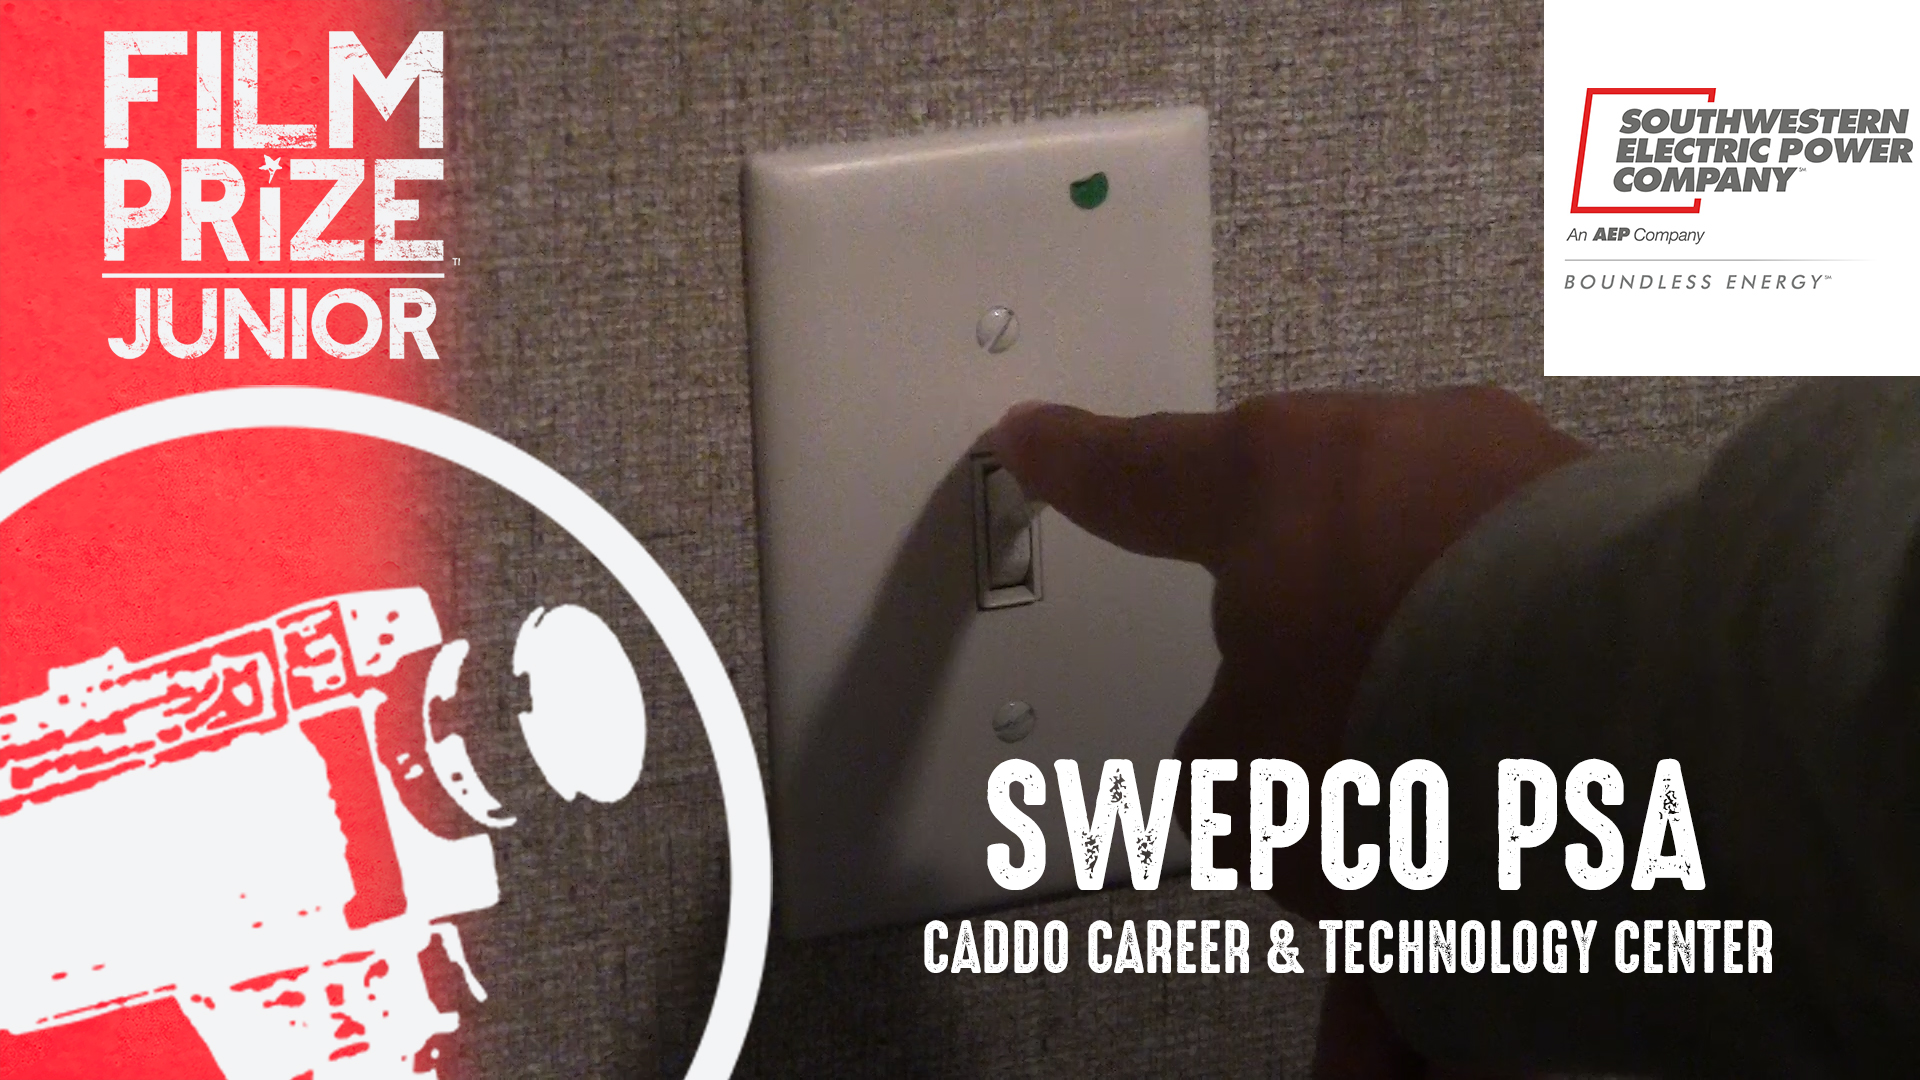 SWEPCO PSA by Can Plaflair